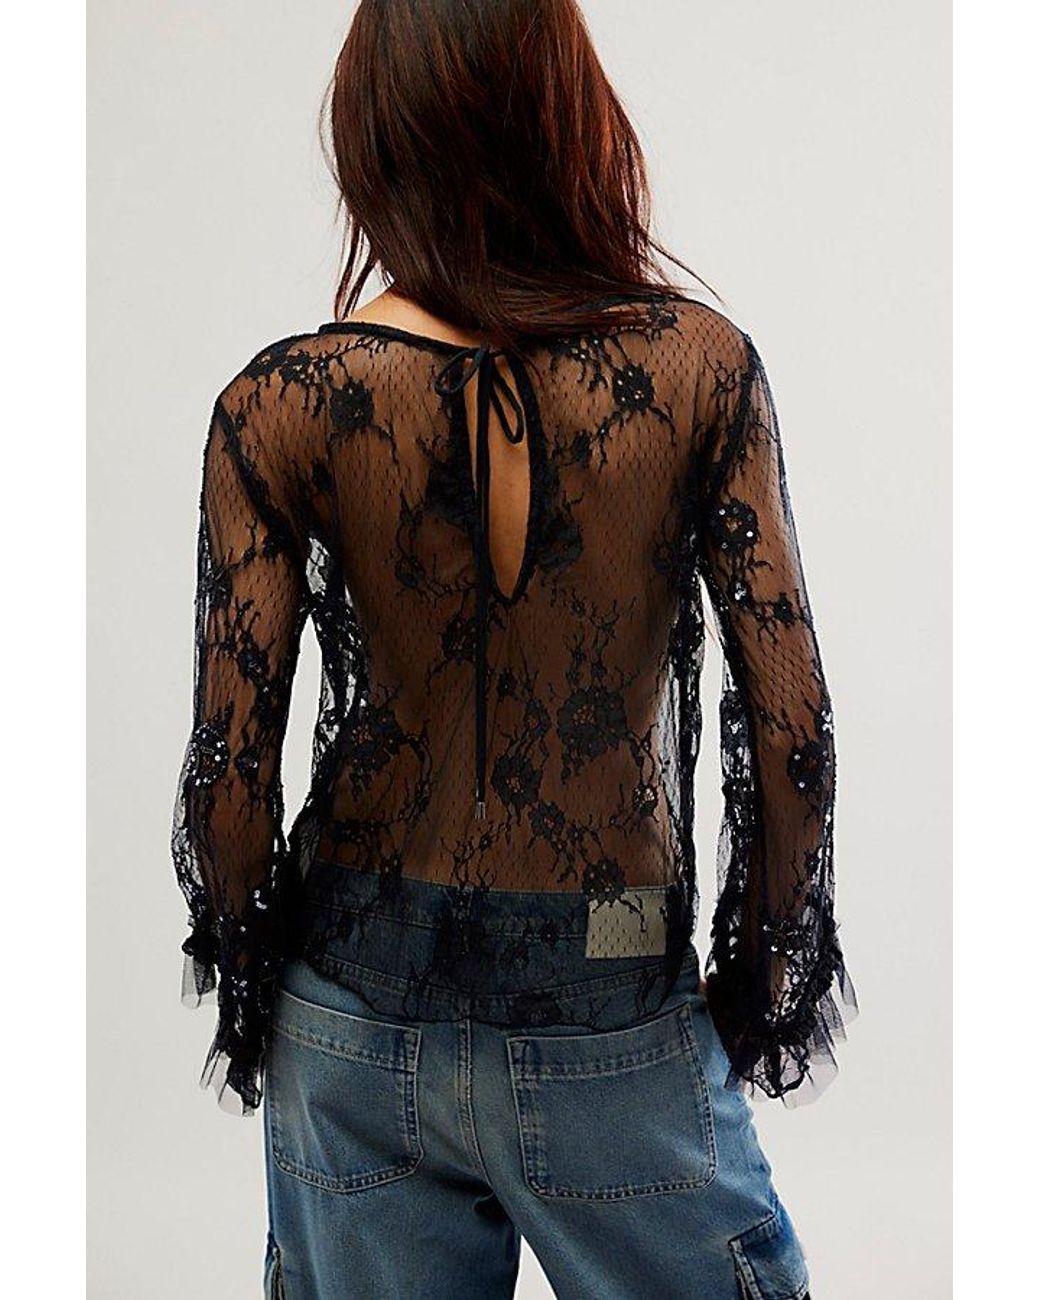 In love with this lace top! I got the Free People and . Let me k, Lace Top